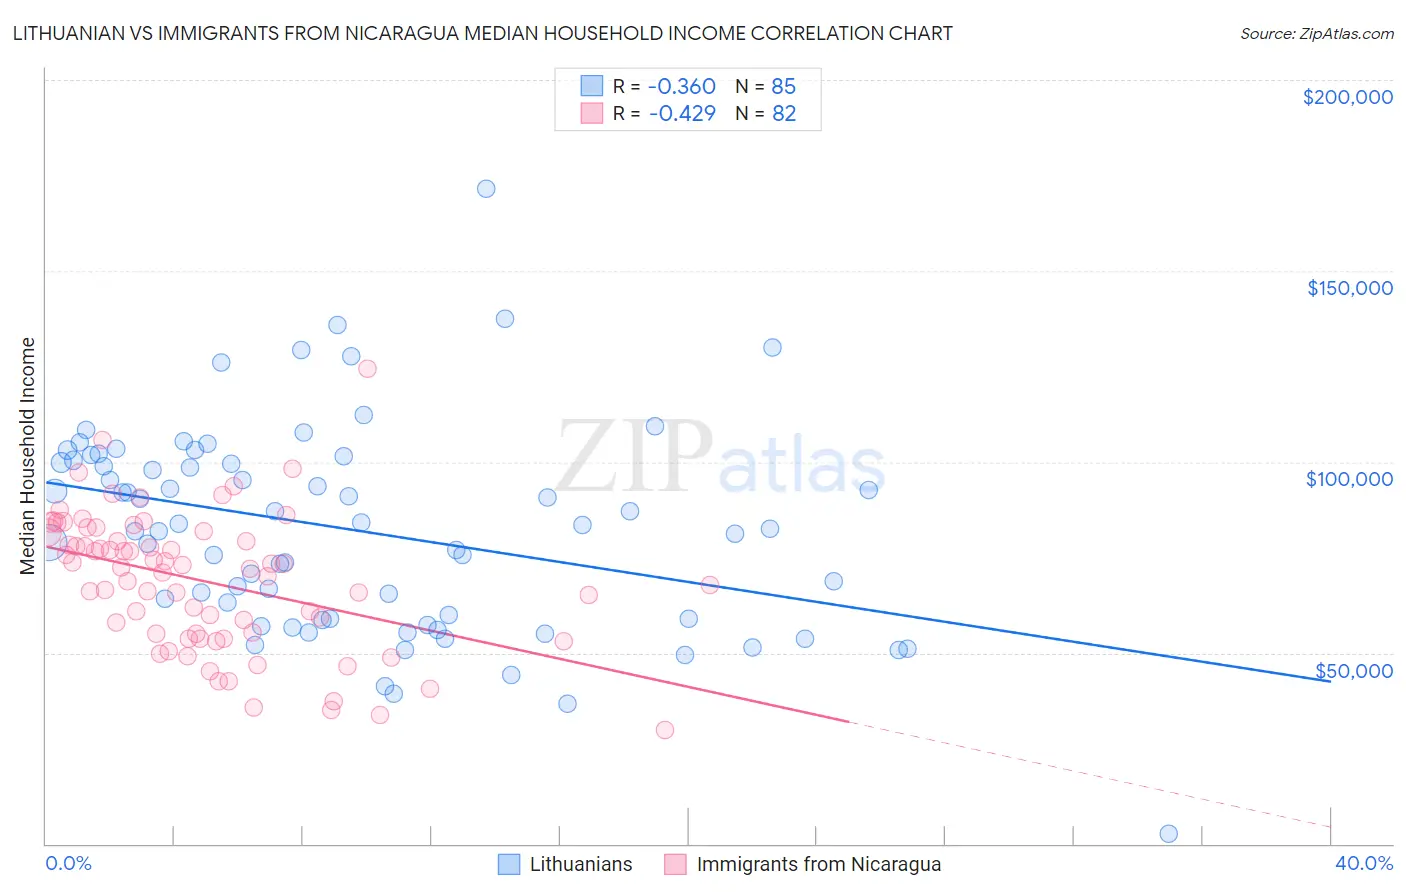 Lithuanian vs Immigrants from Nicaragua Median Household Income